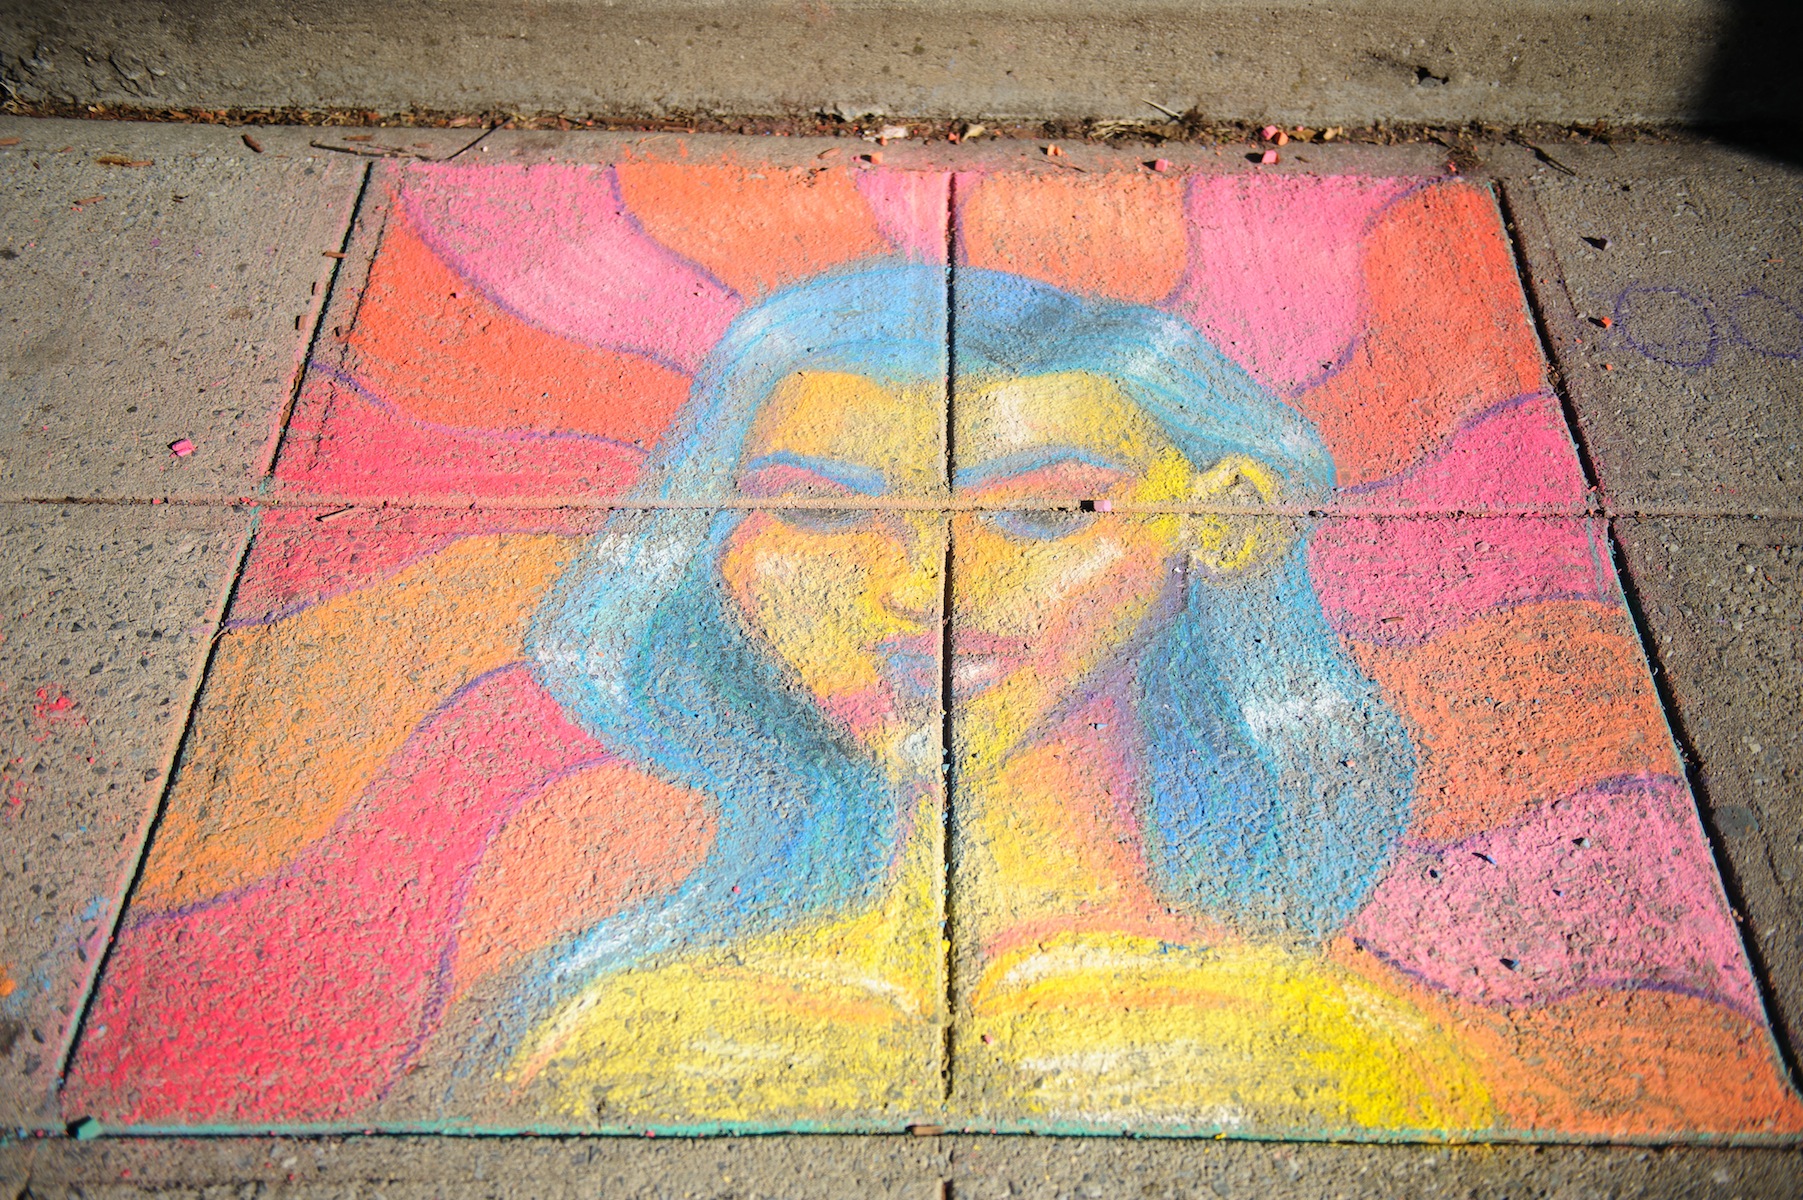 Daniel Aviles, an Ossining High School graduate now attending art school, received third place at the Village of Ossining’s First Annual Chalk It Up! Festival held recently at Market Square.